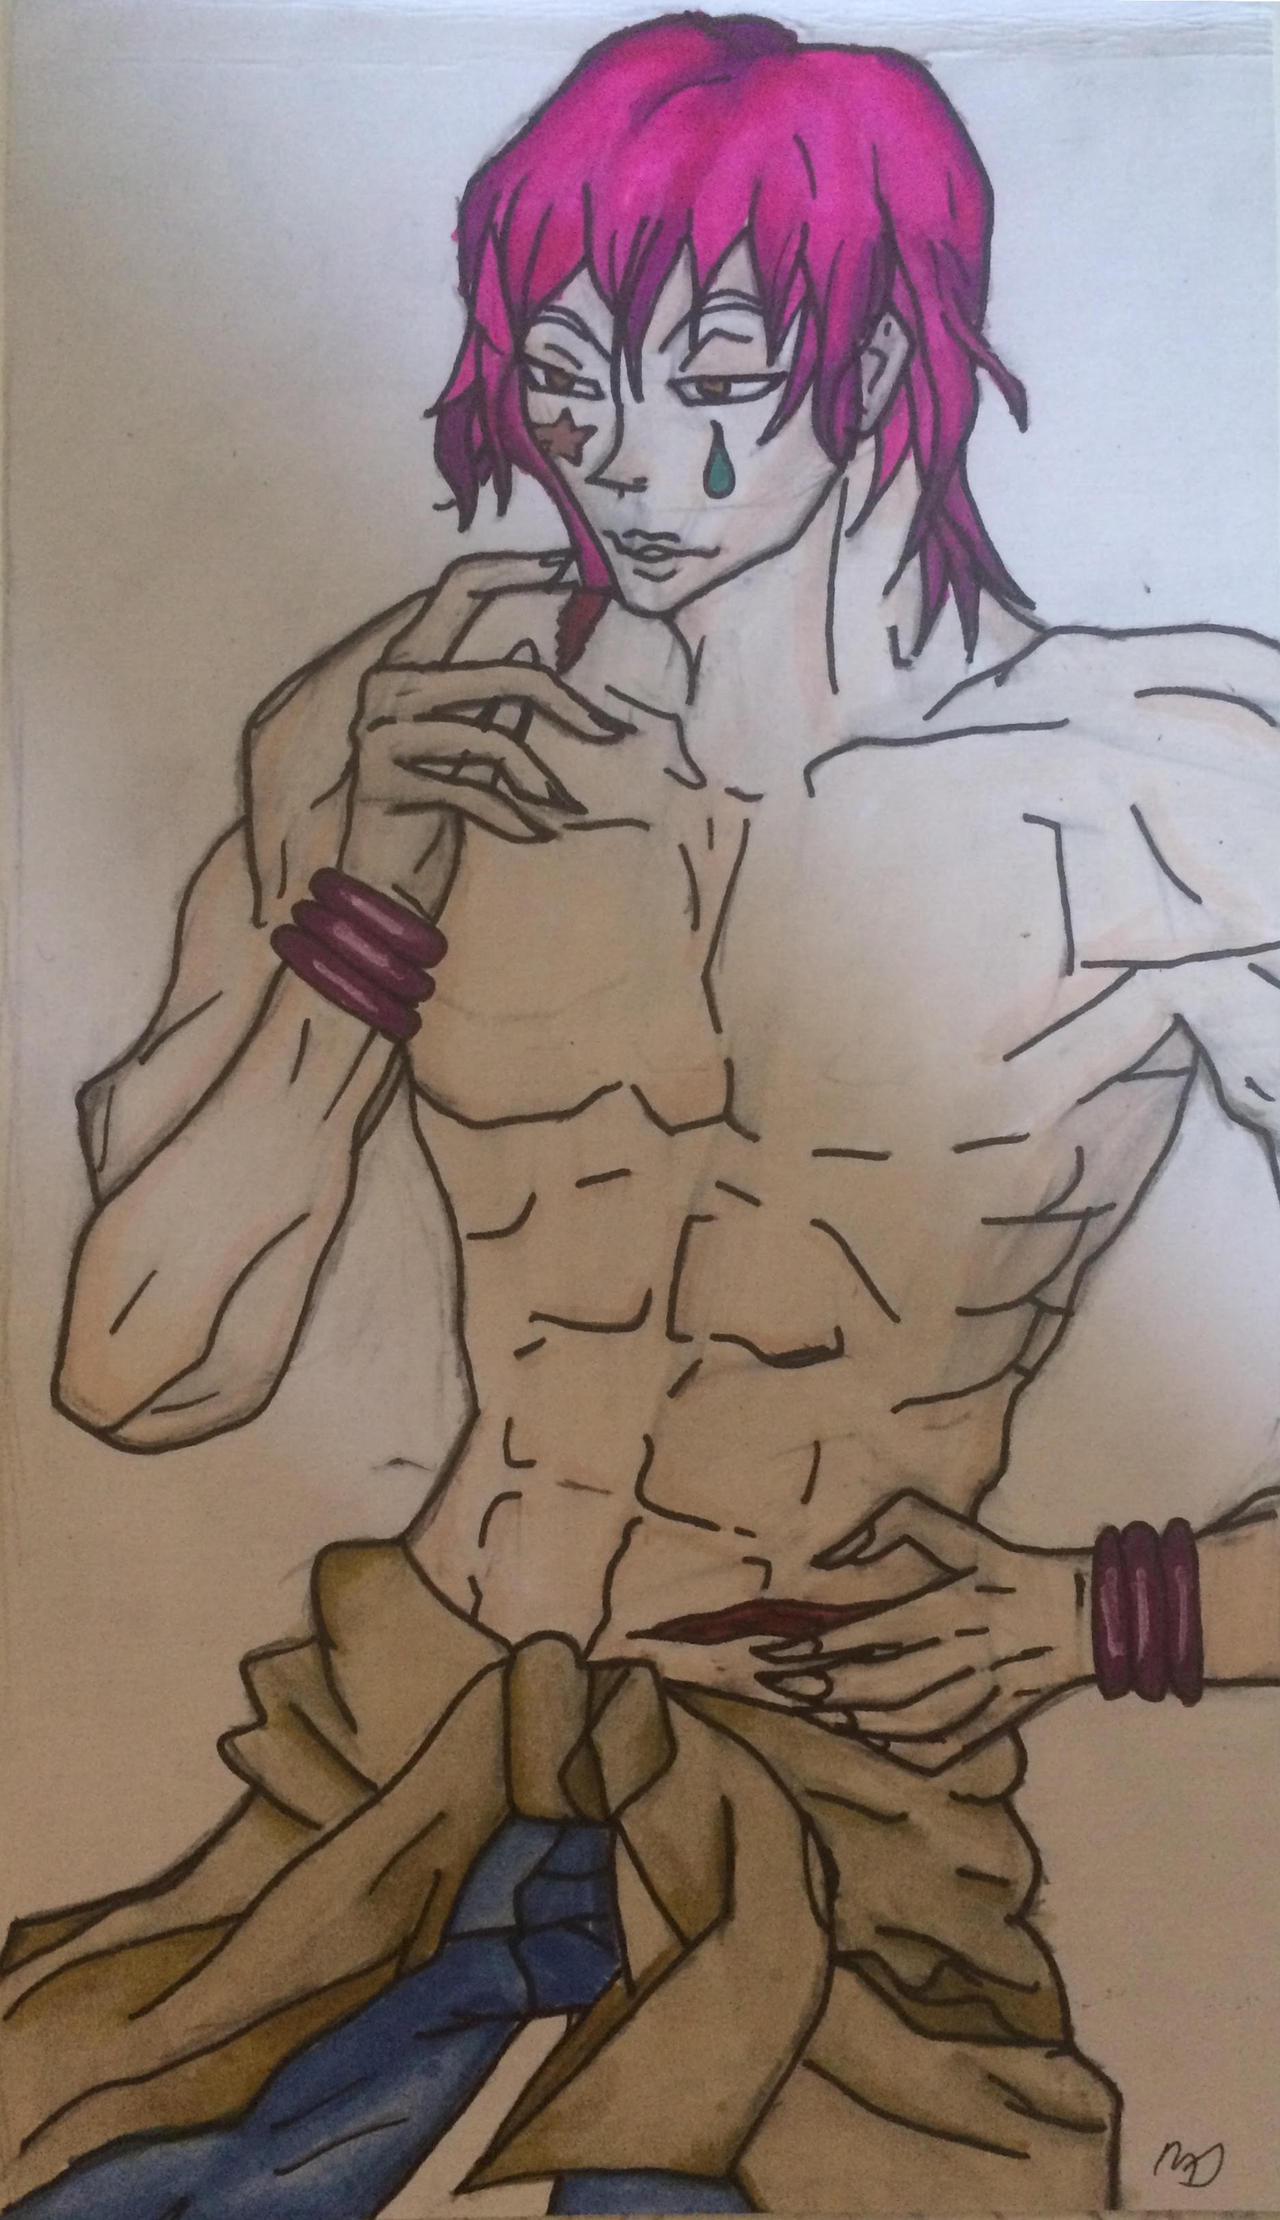 Hisoka Shirtless With His Hair Down by MinaDaniels on DeviantArt